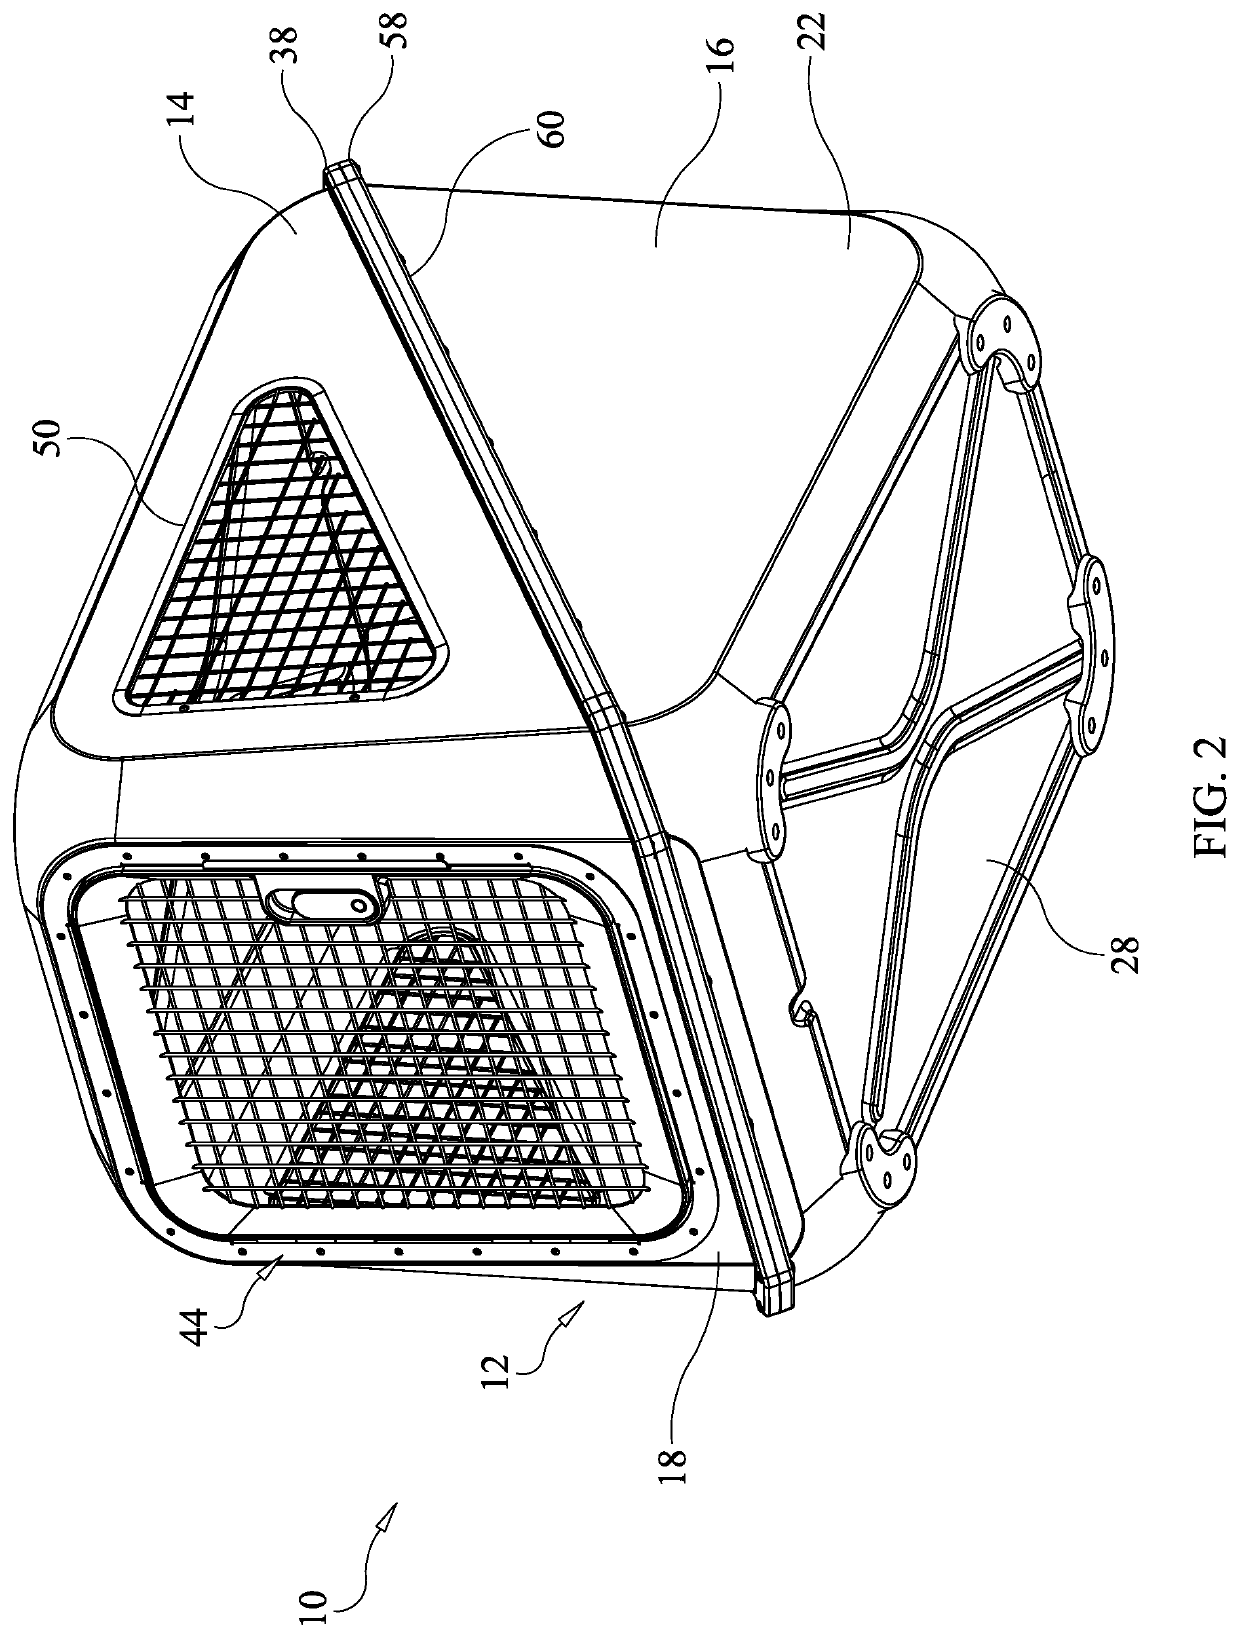 Pet kennel and method of construction